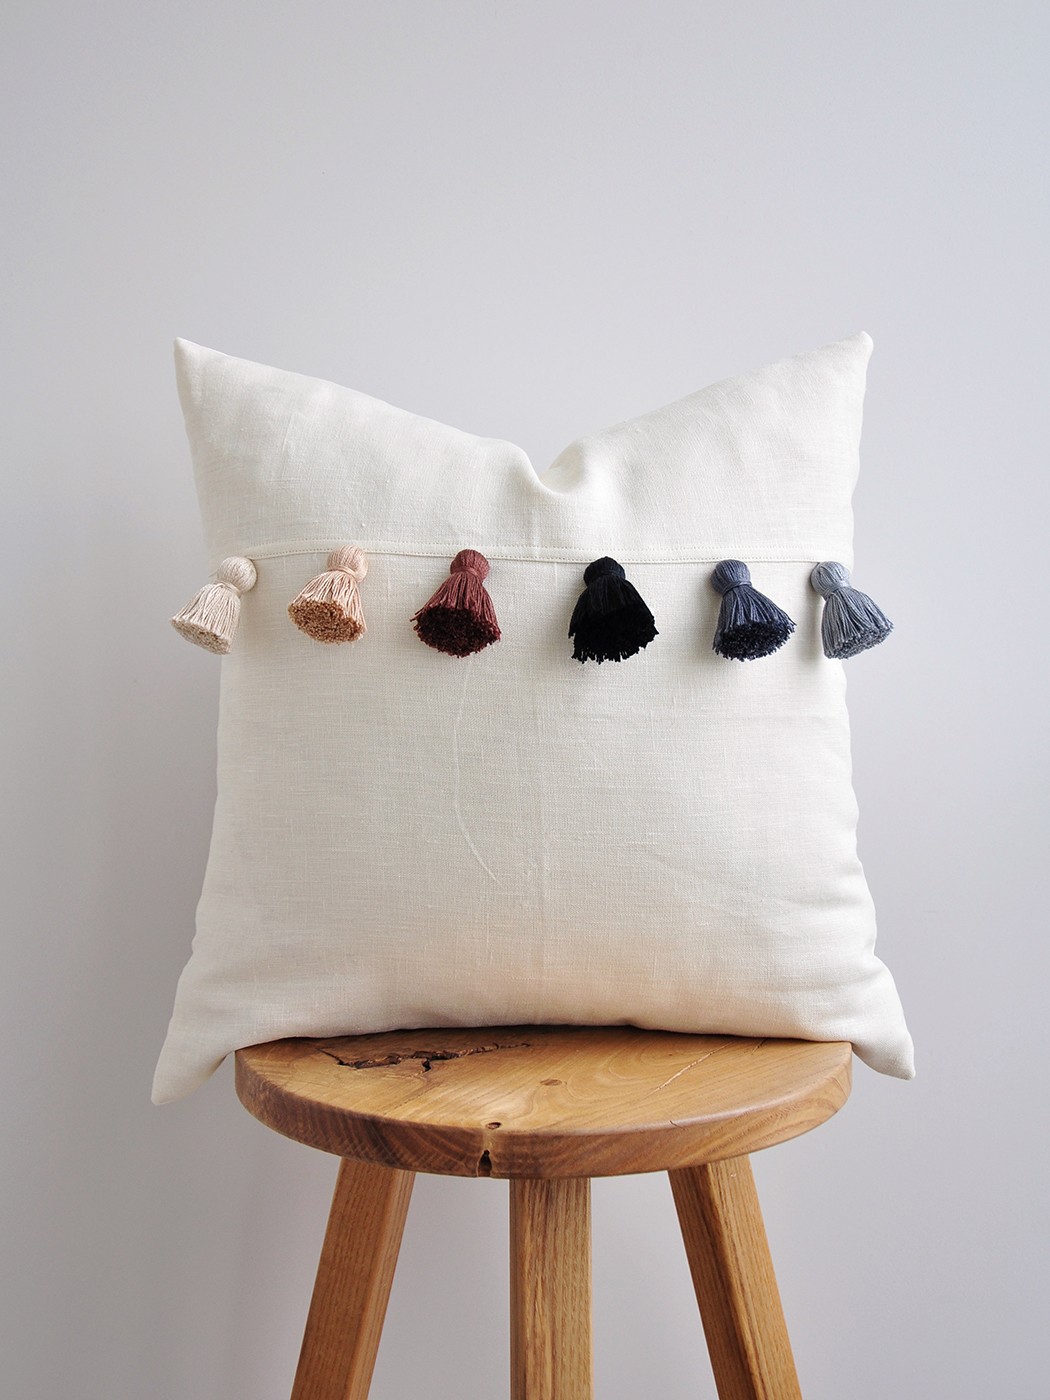 Pillow with tassels